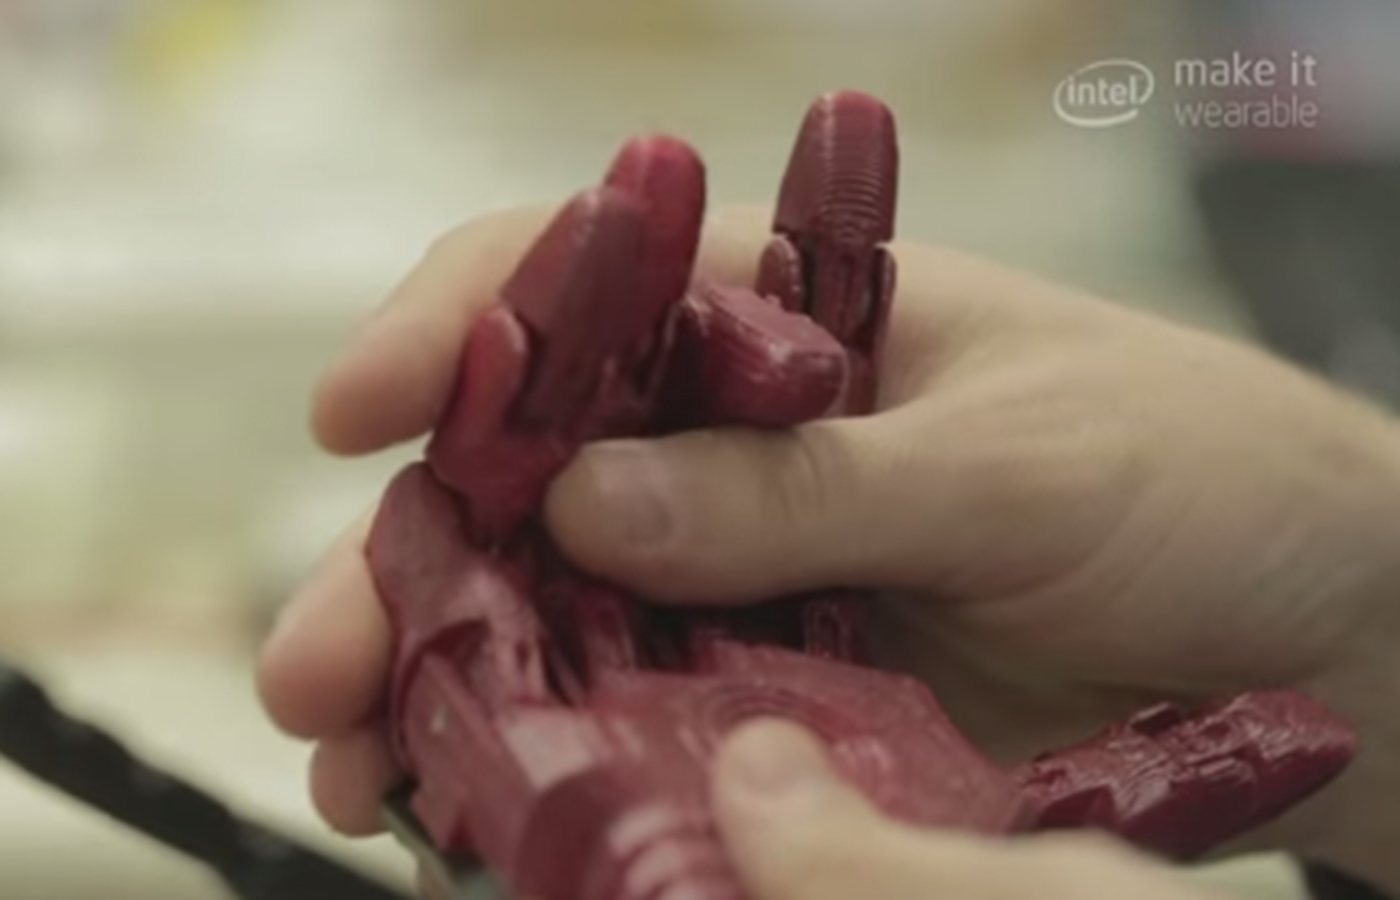 PHOTO: A low cost robotic hand was the second place winner of Intel's "Make It Wearable" contest.
